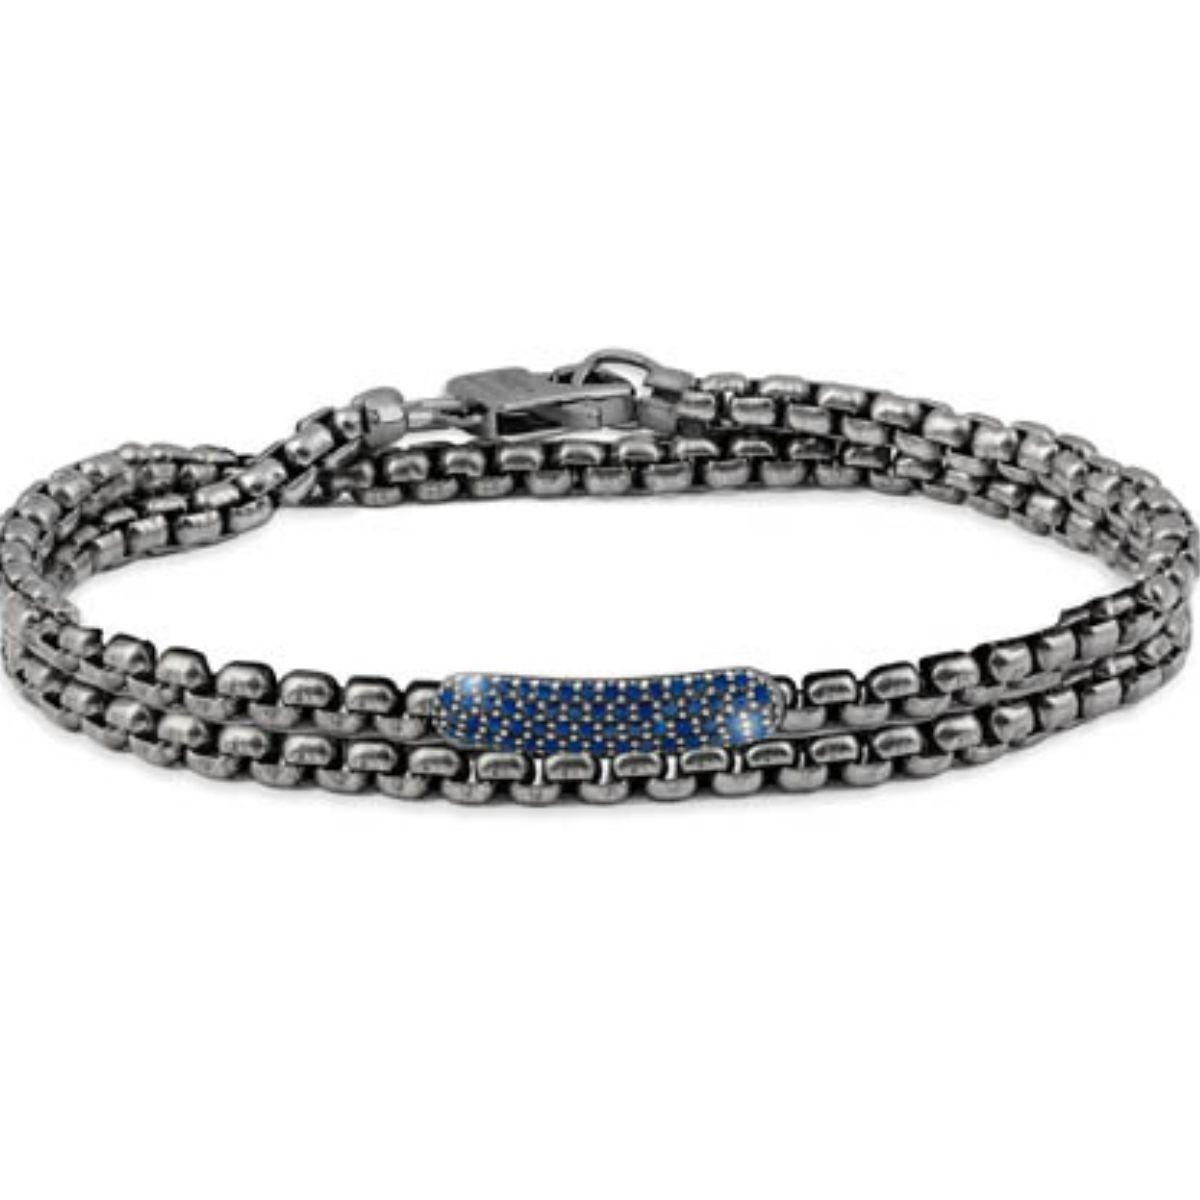 Men's Black Rhodium Plated Sterling Silver Catena Baton Bracelet with Sapphires Size S For Sale